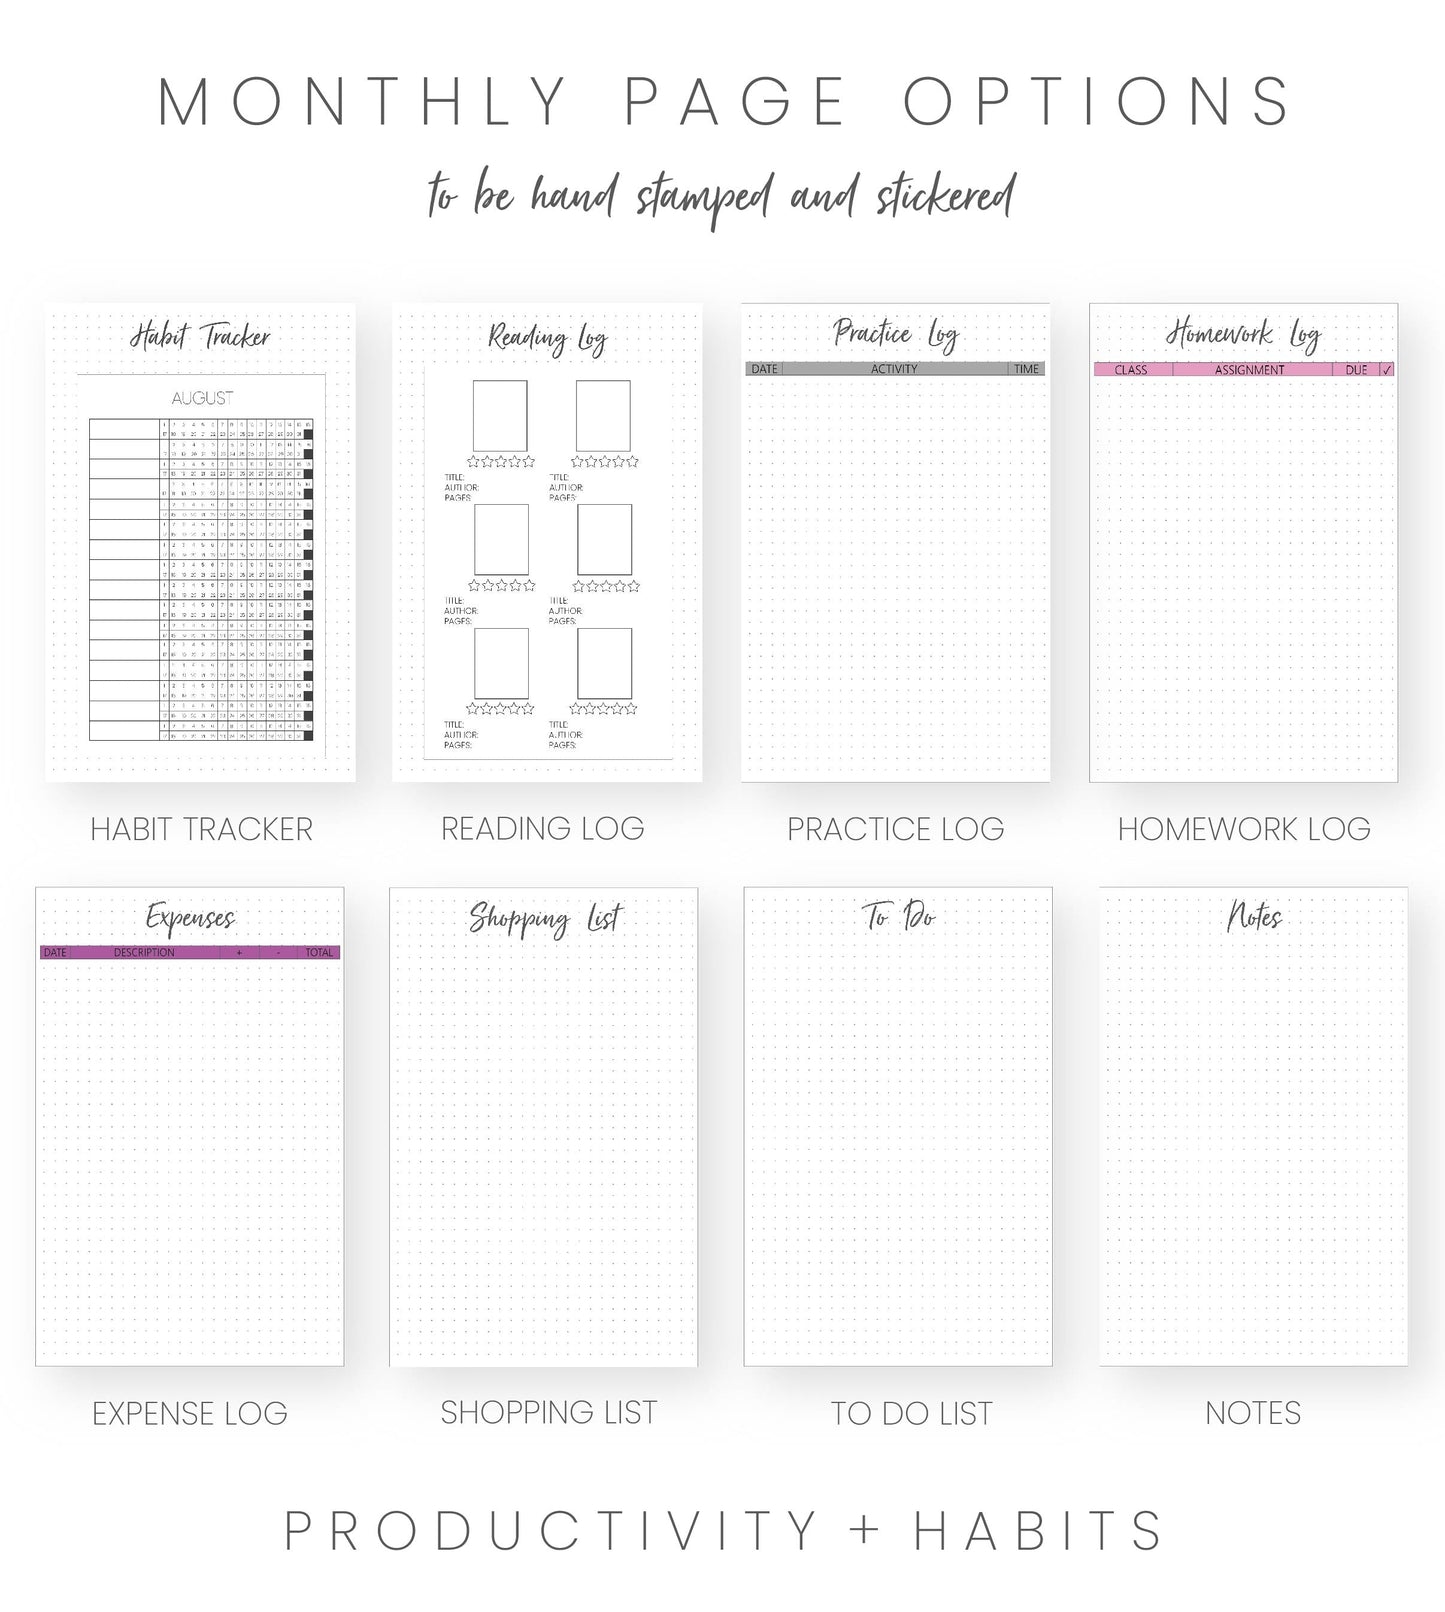 2024-25 Personalized Illustrated Planner Pointe Pink